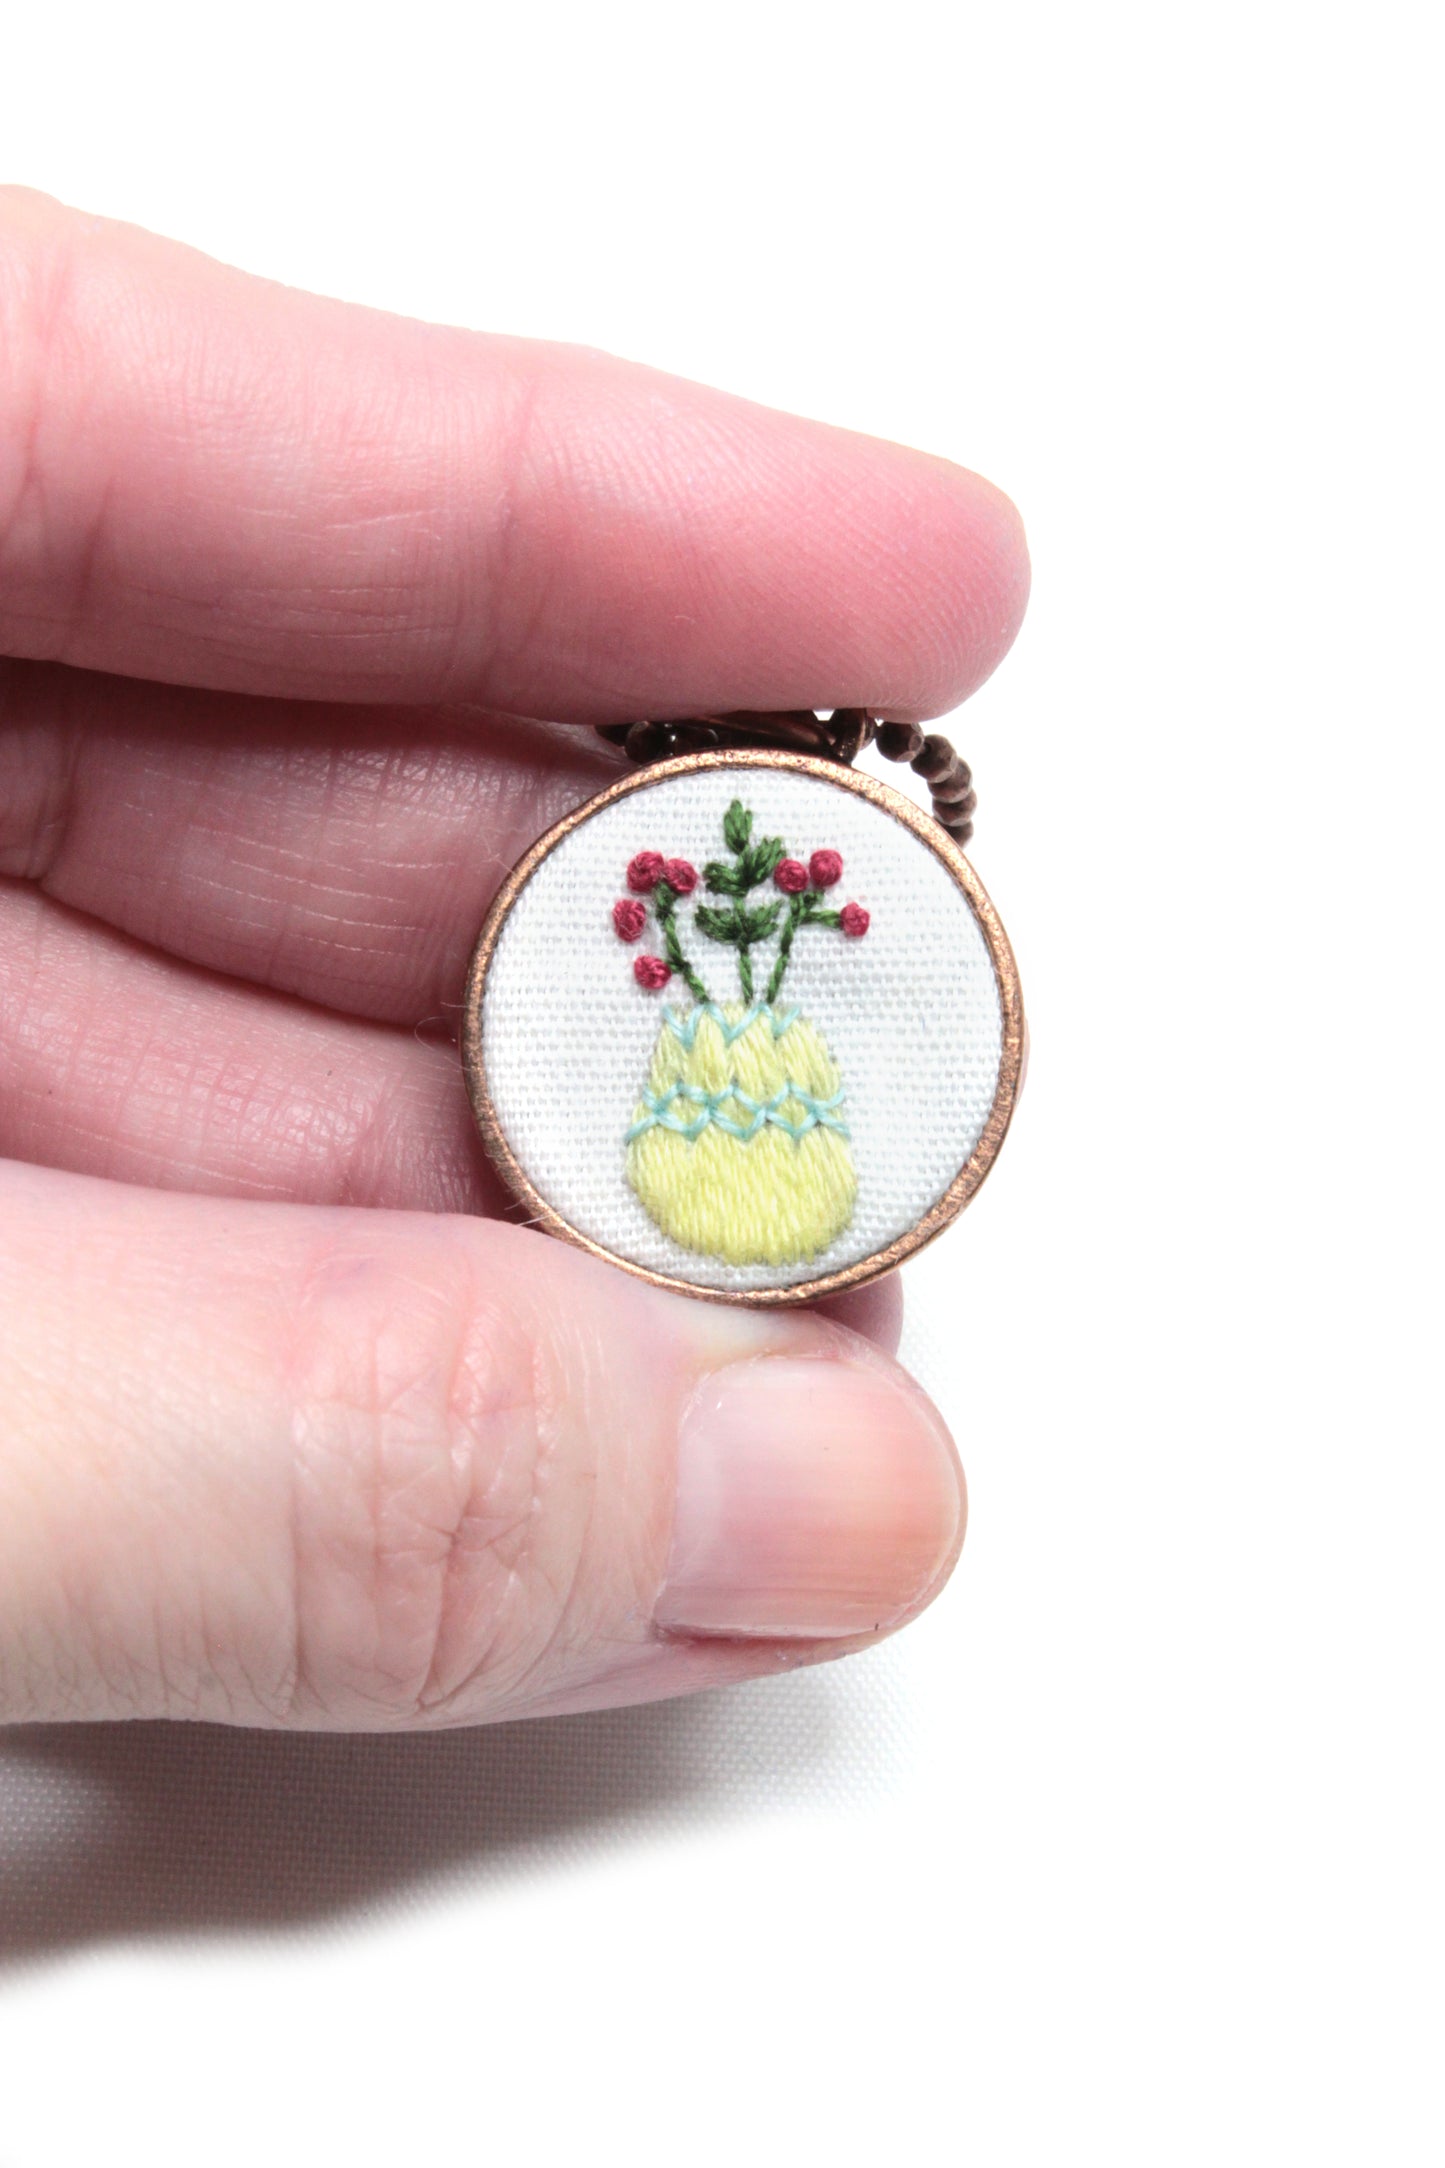 Embroidery Yellow Vase Red Flowers Necklace